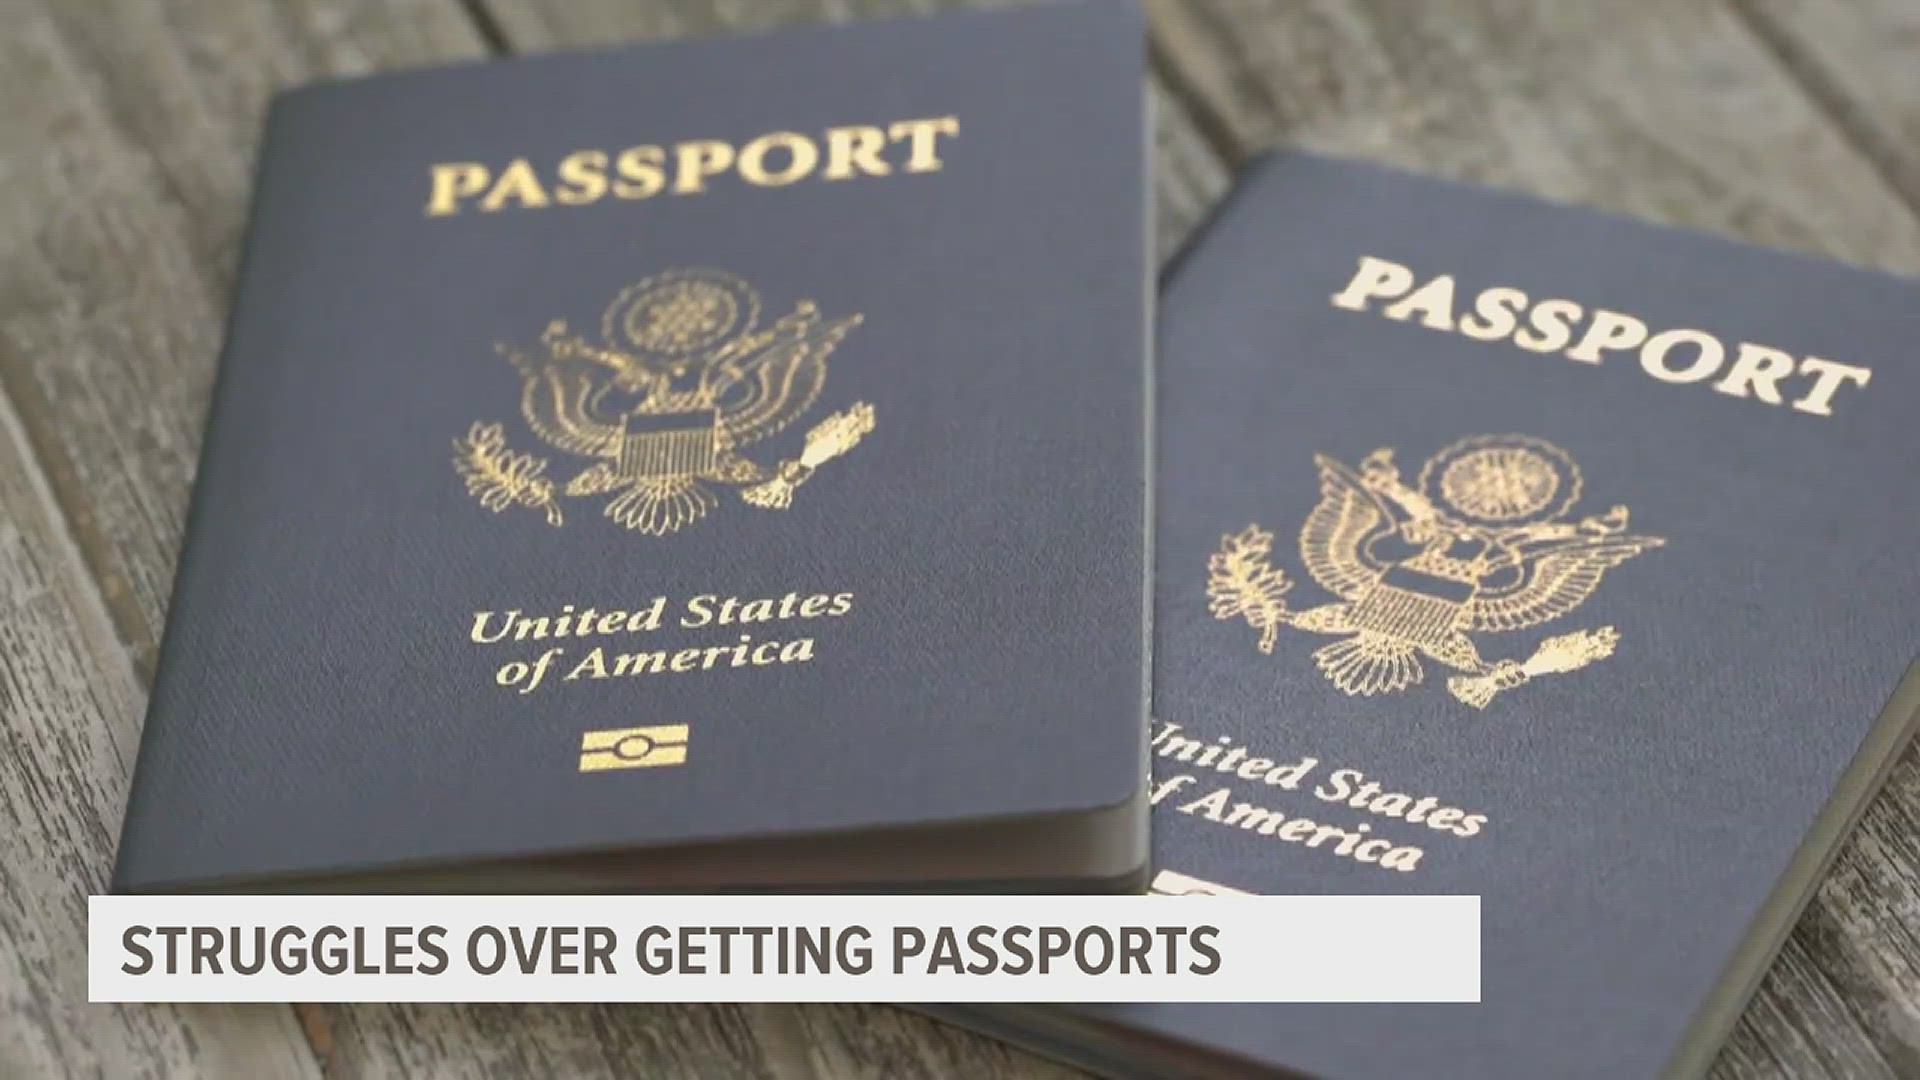 Demand went way down for passports during the pandemic. Now, the State Department says it's on track to break the record of passports administered in a year.